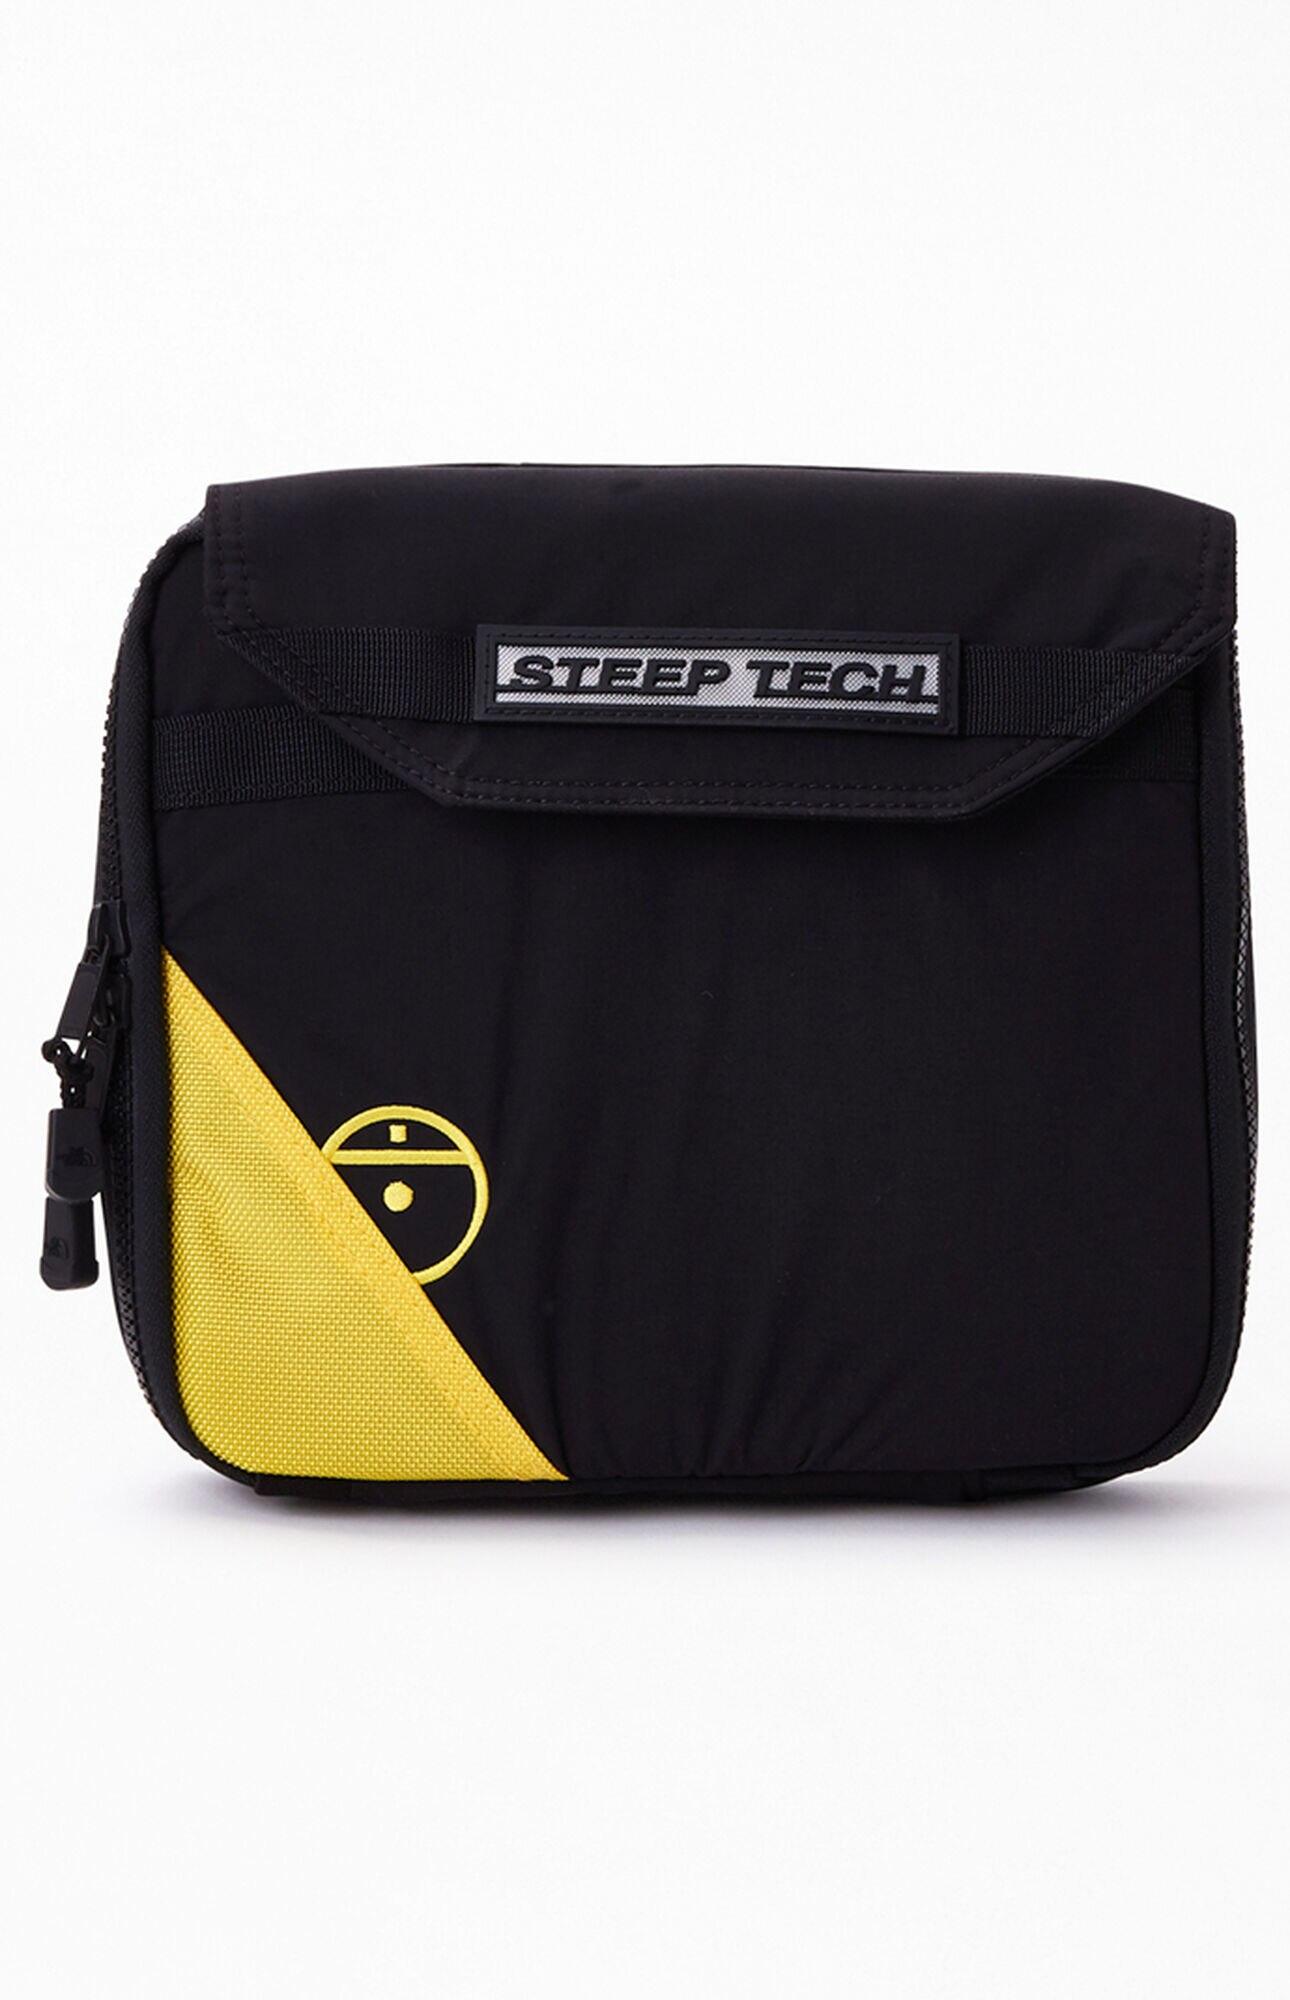 The North Face X Steep Tech Chest Pack in Black,Yellow (Black) for Men